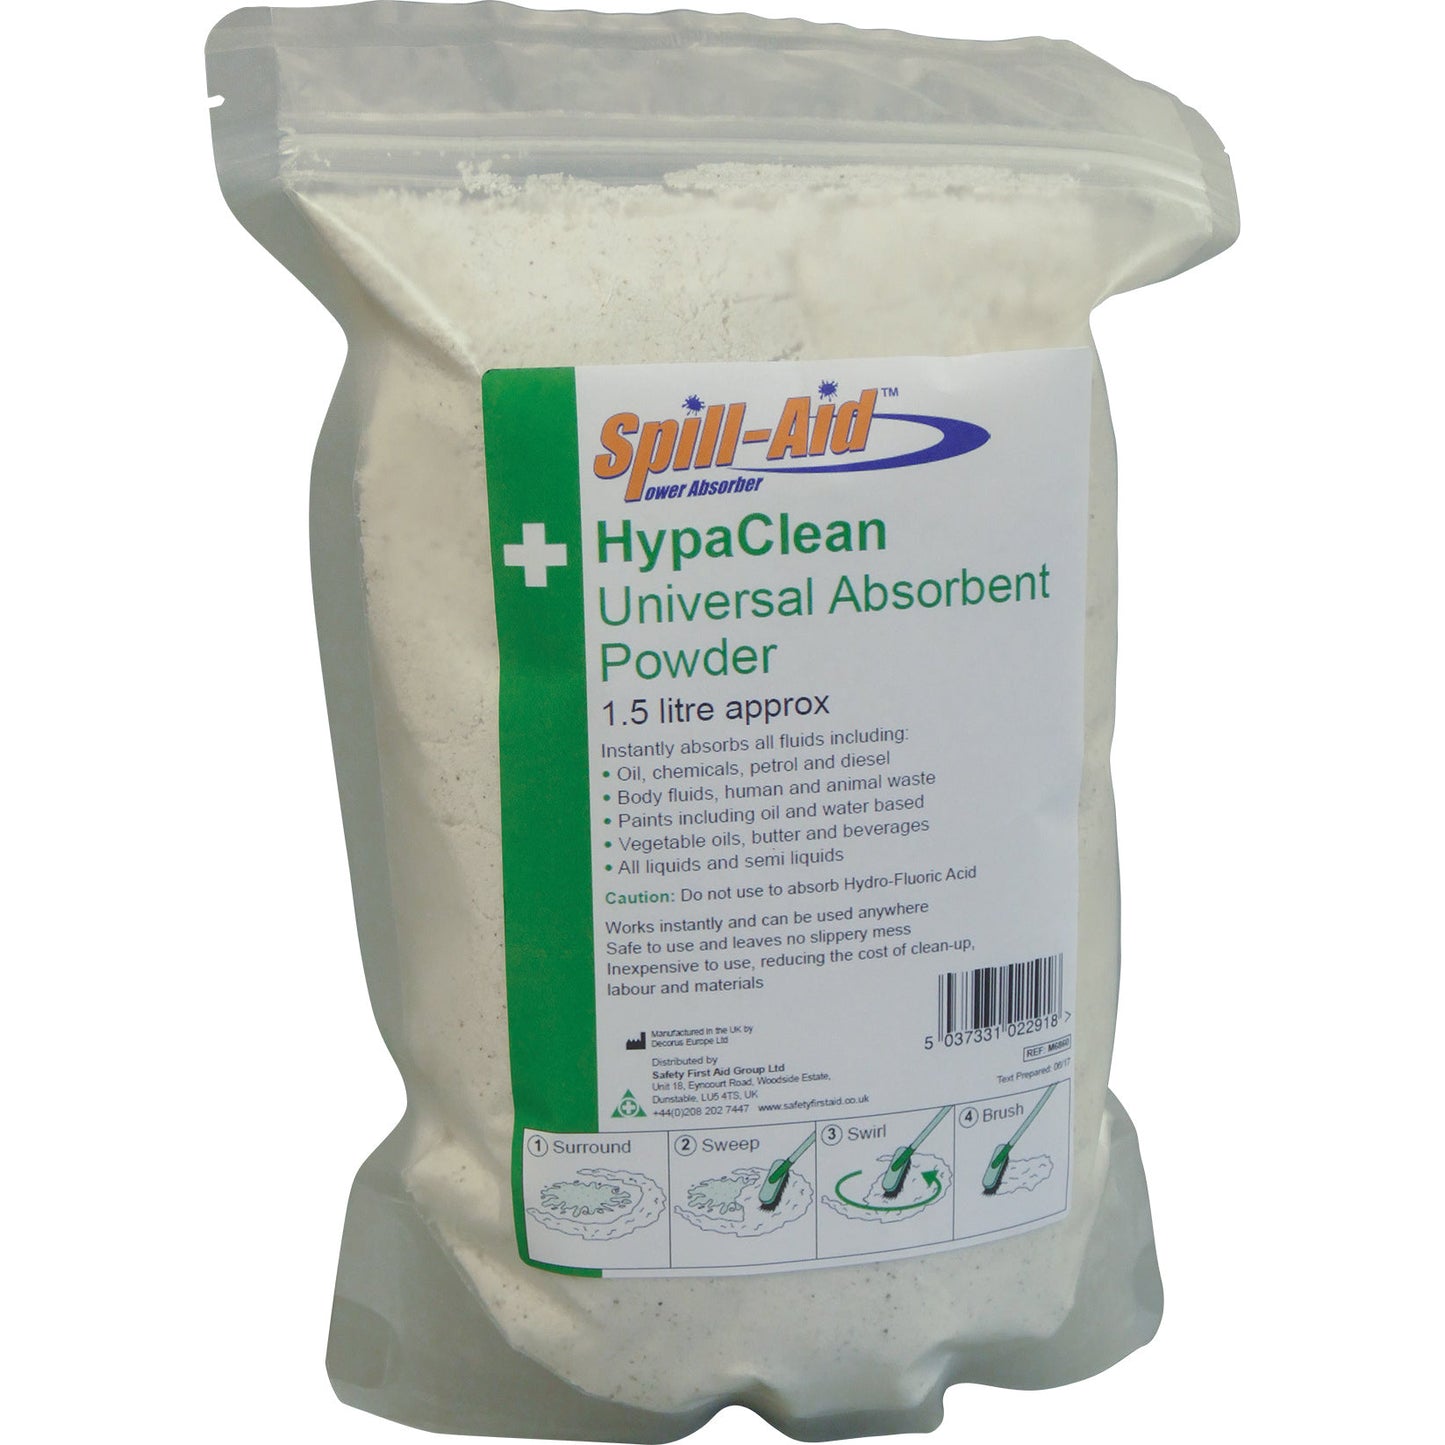 HypaClean Universal Absorbent Powder, 1.5 Litre